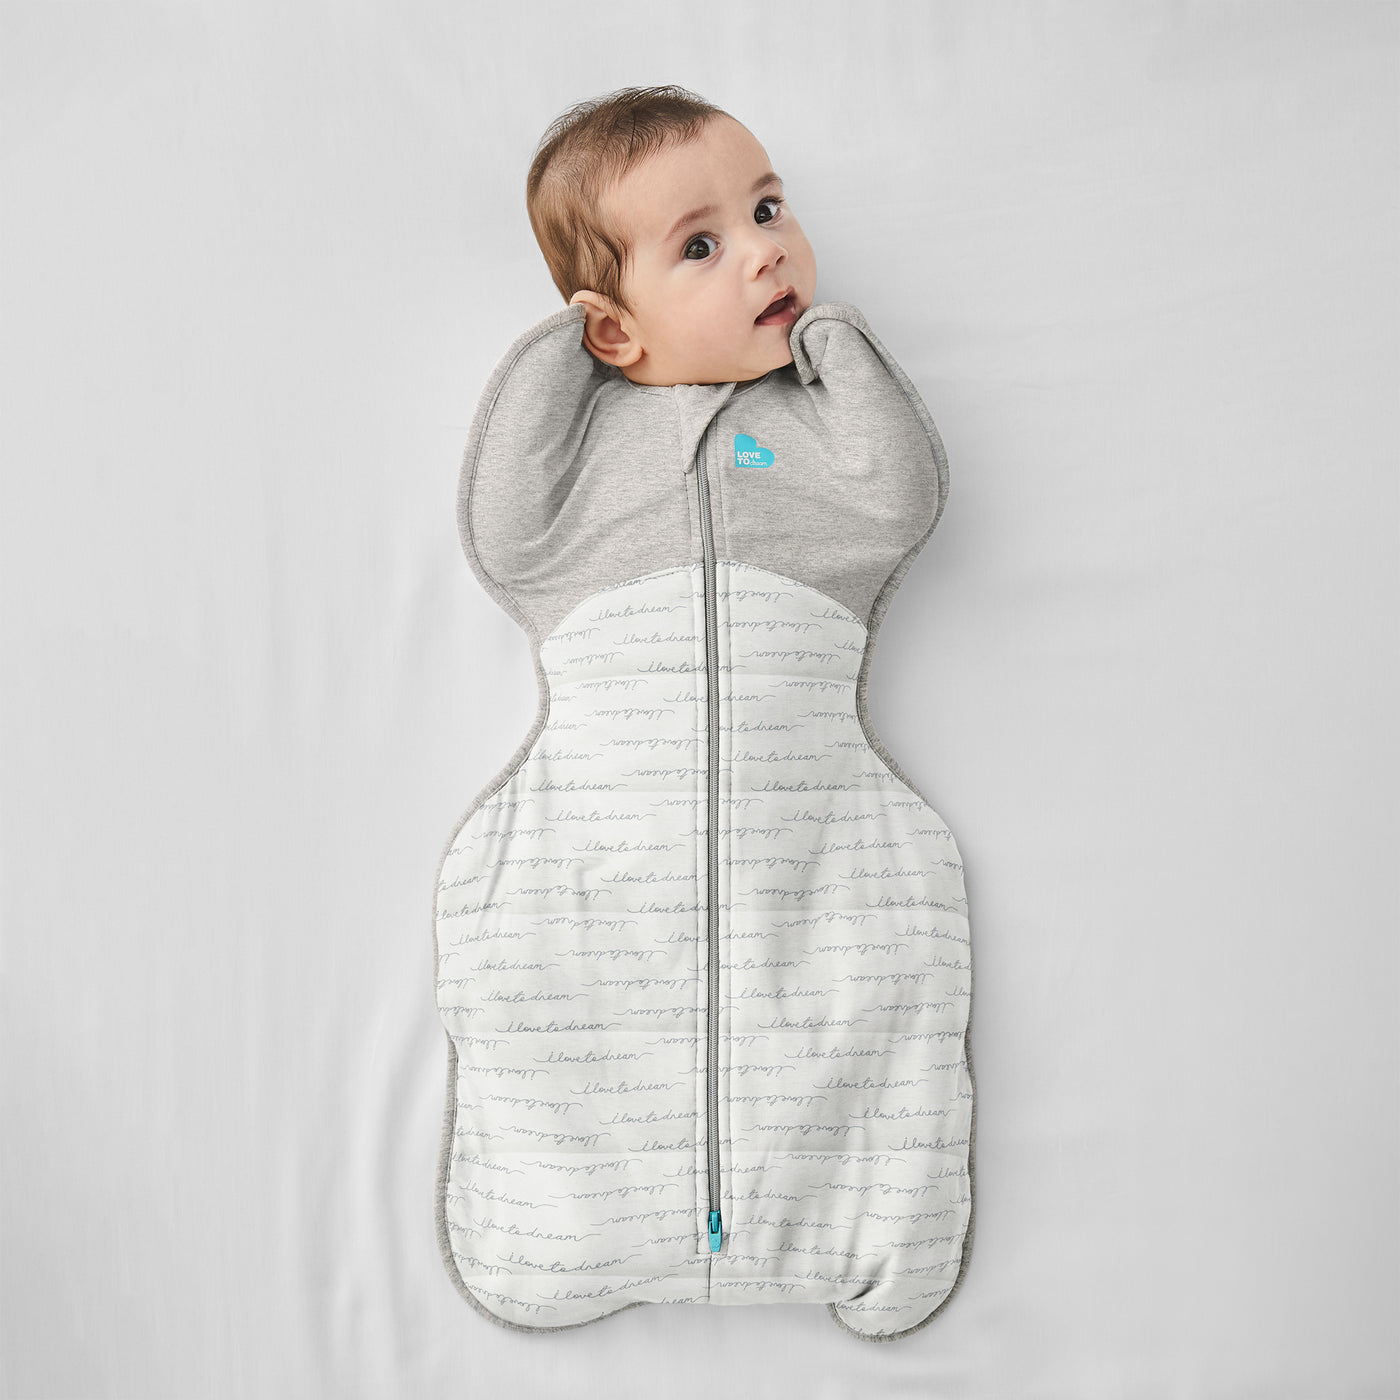 Autumn Swaddle Up™ Starter Pack - 1.0 & 2.5 TOG - Love to Dream™ NZ 